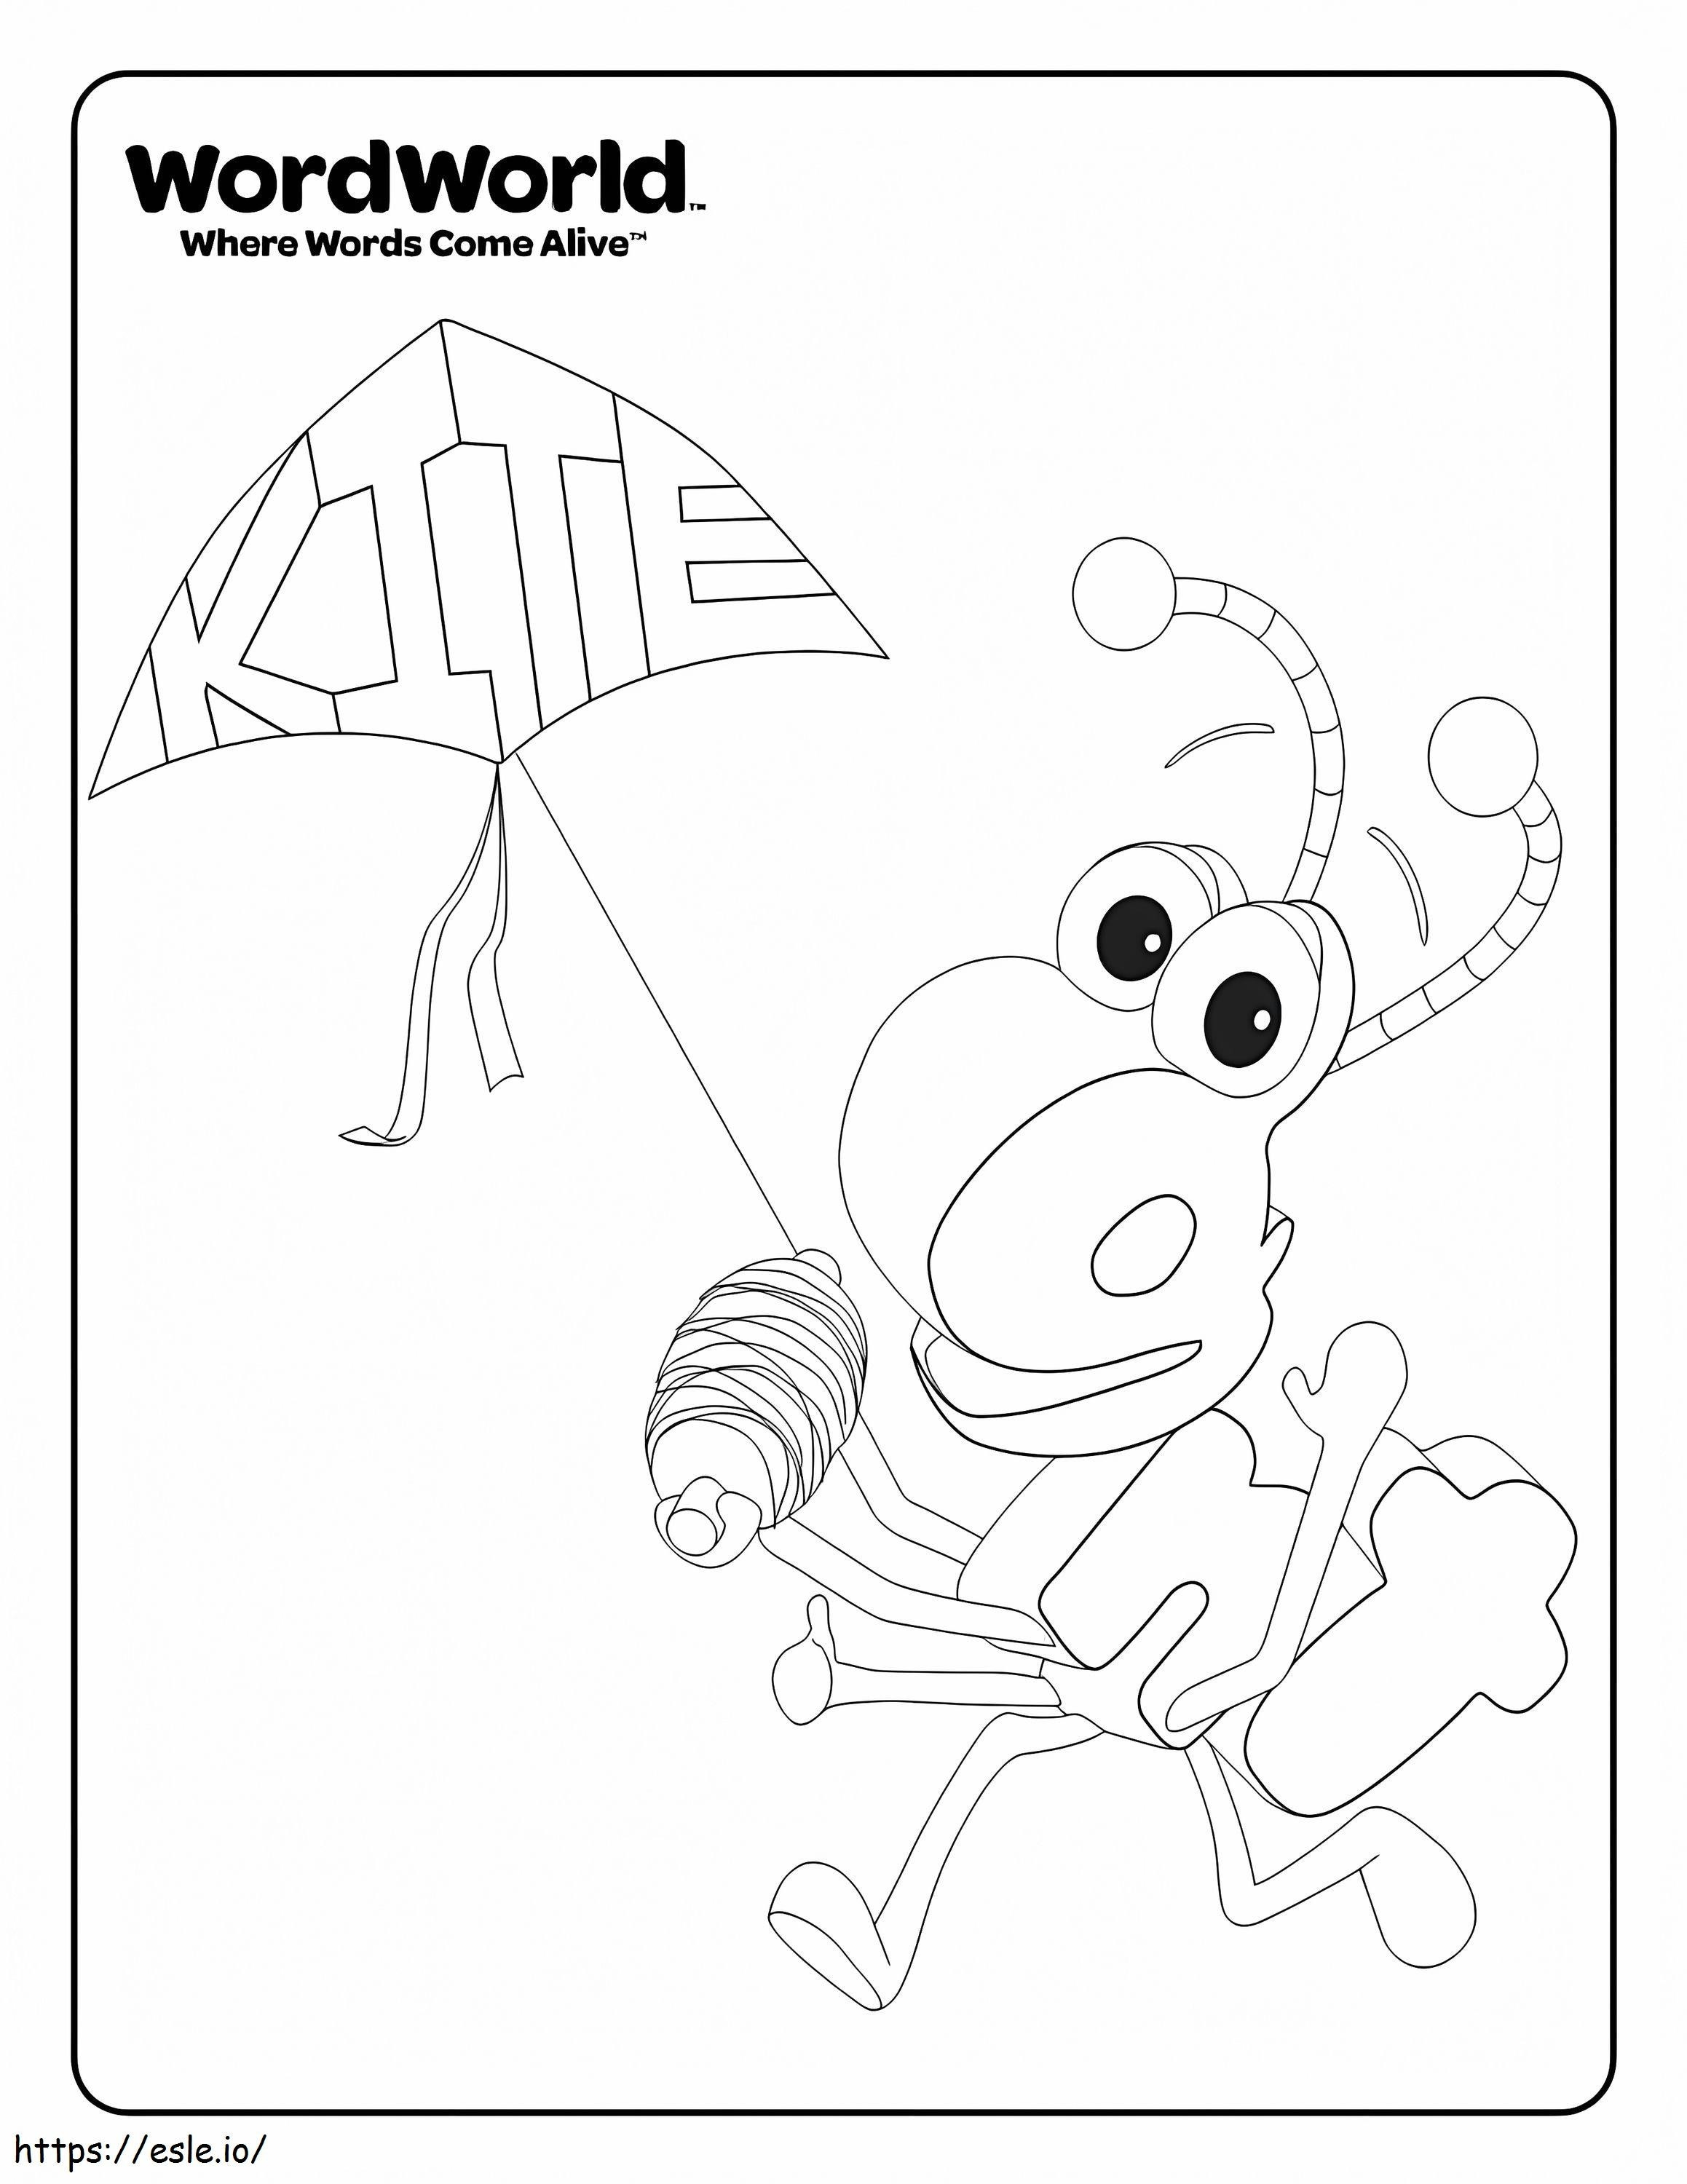 Flying Ants coloring page